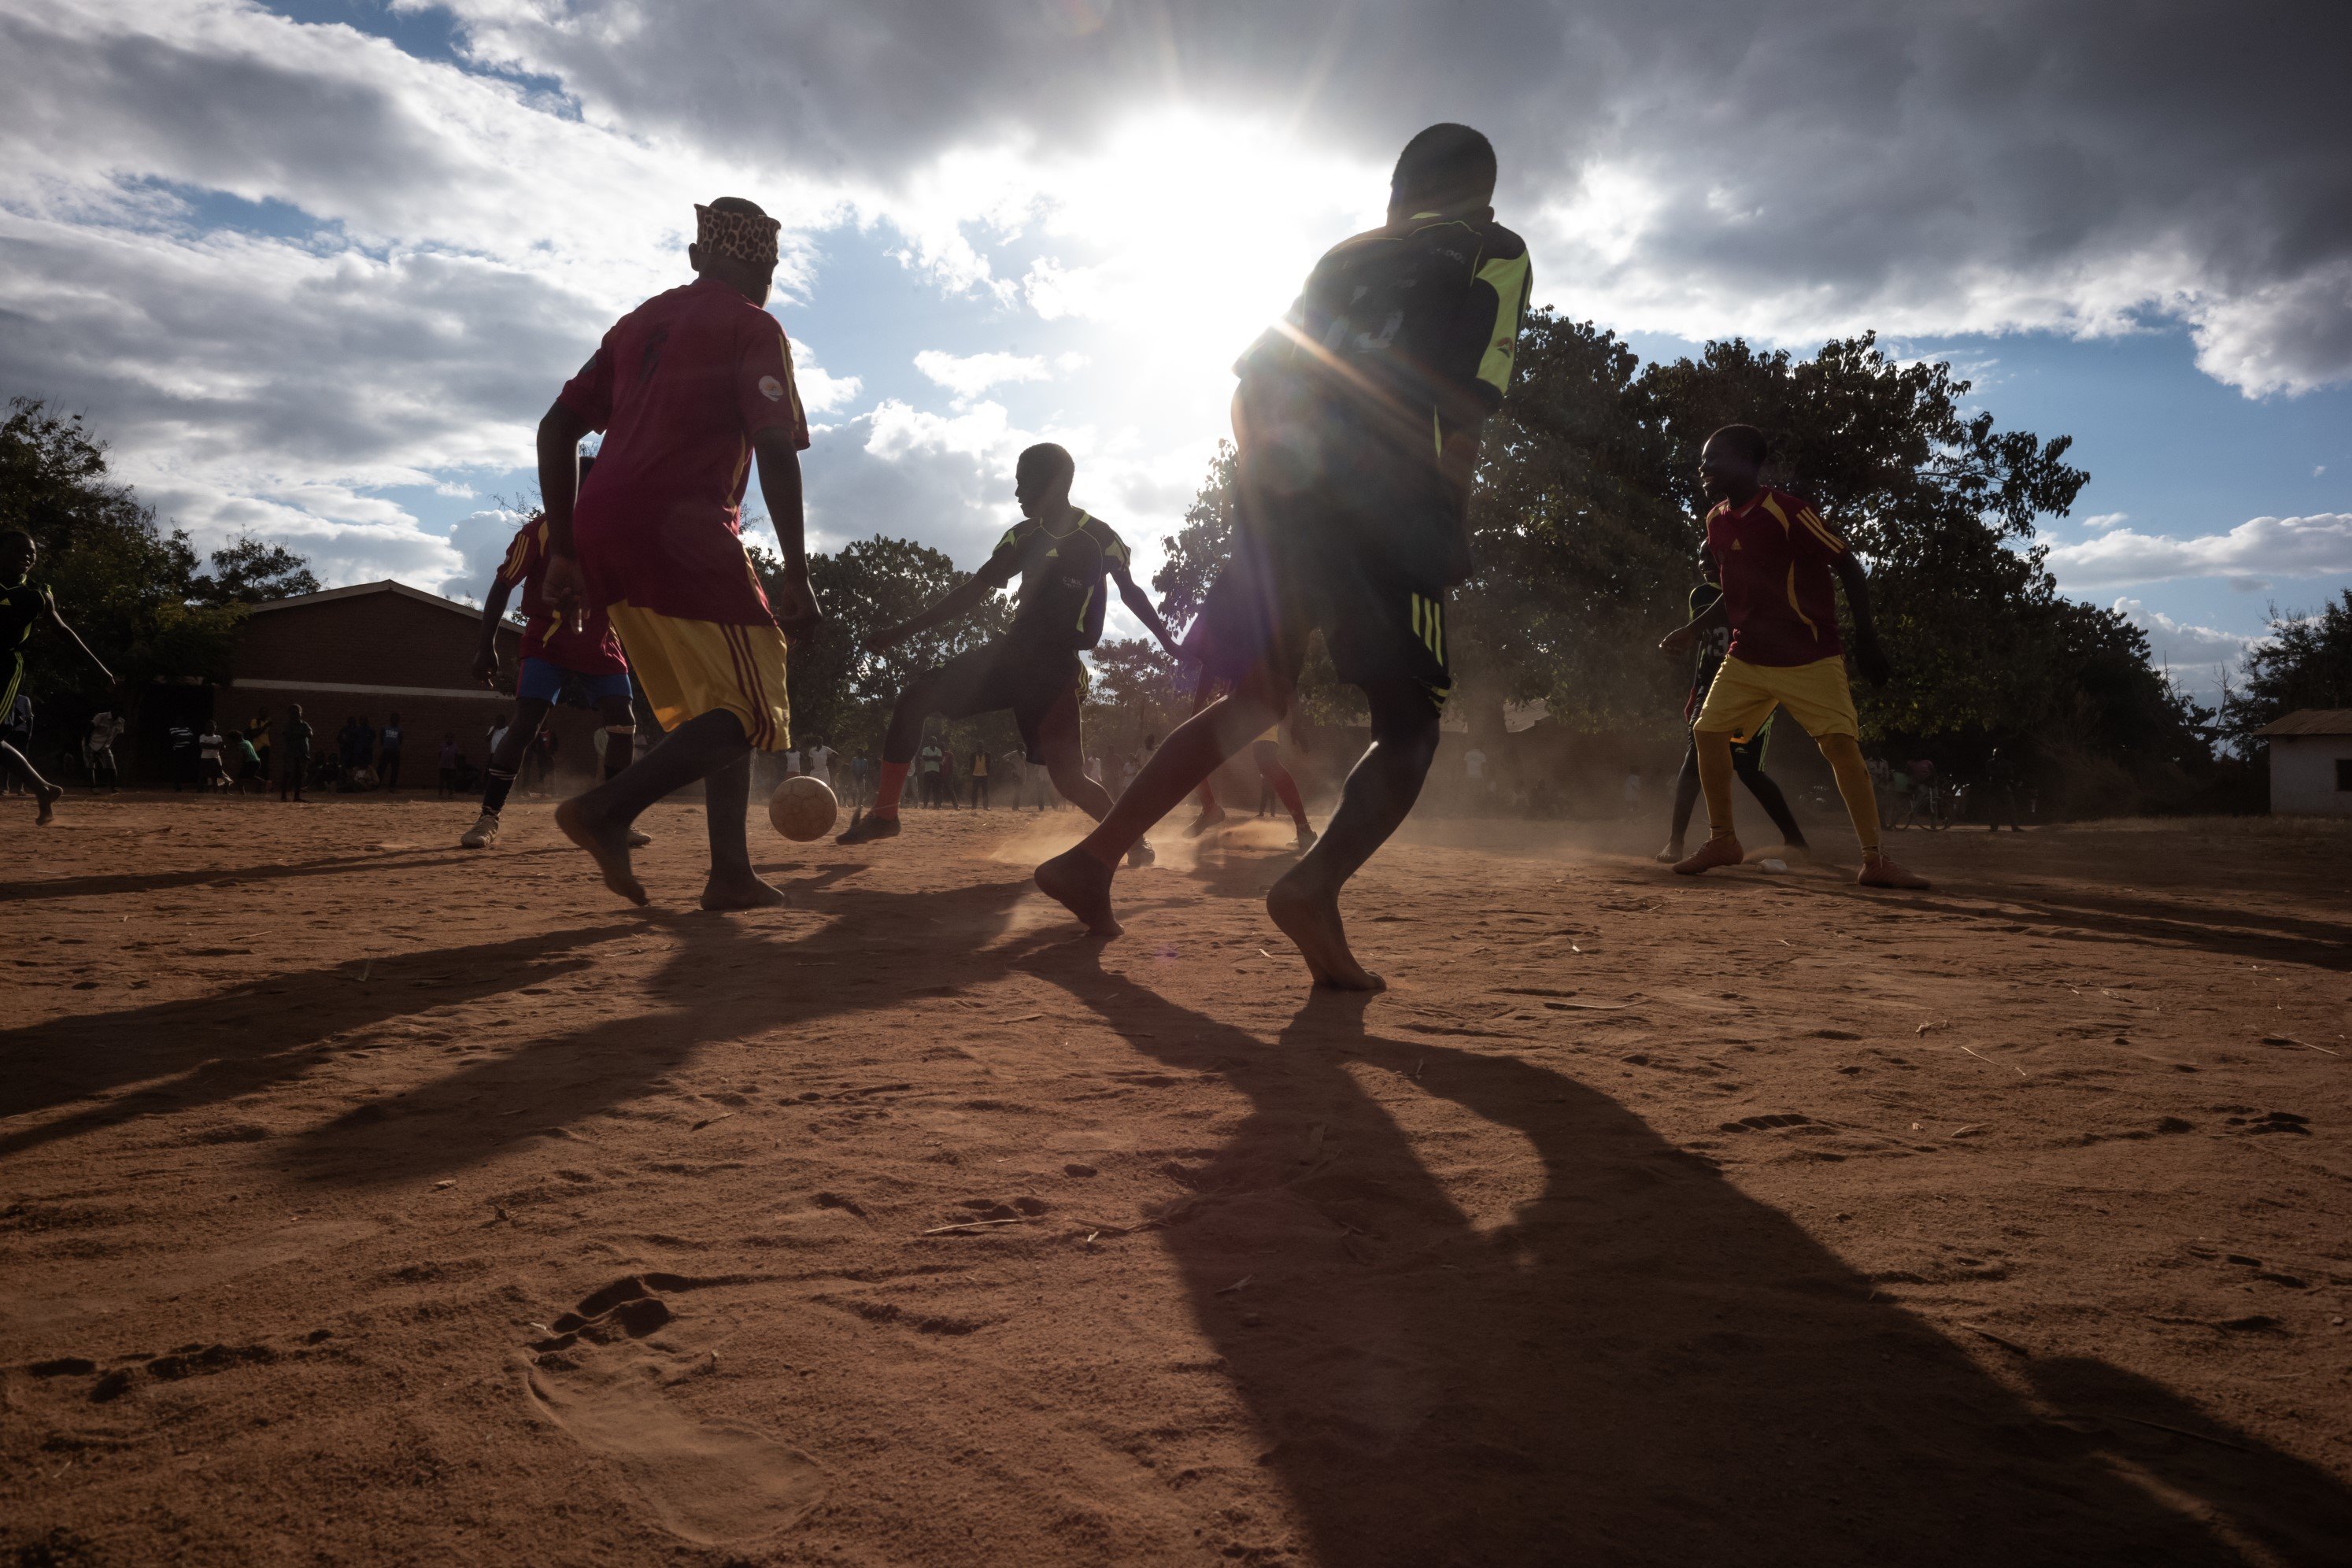 We bring boys and girls together to play football to encourage gender equity.